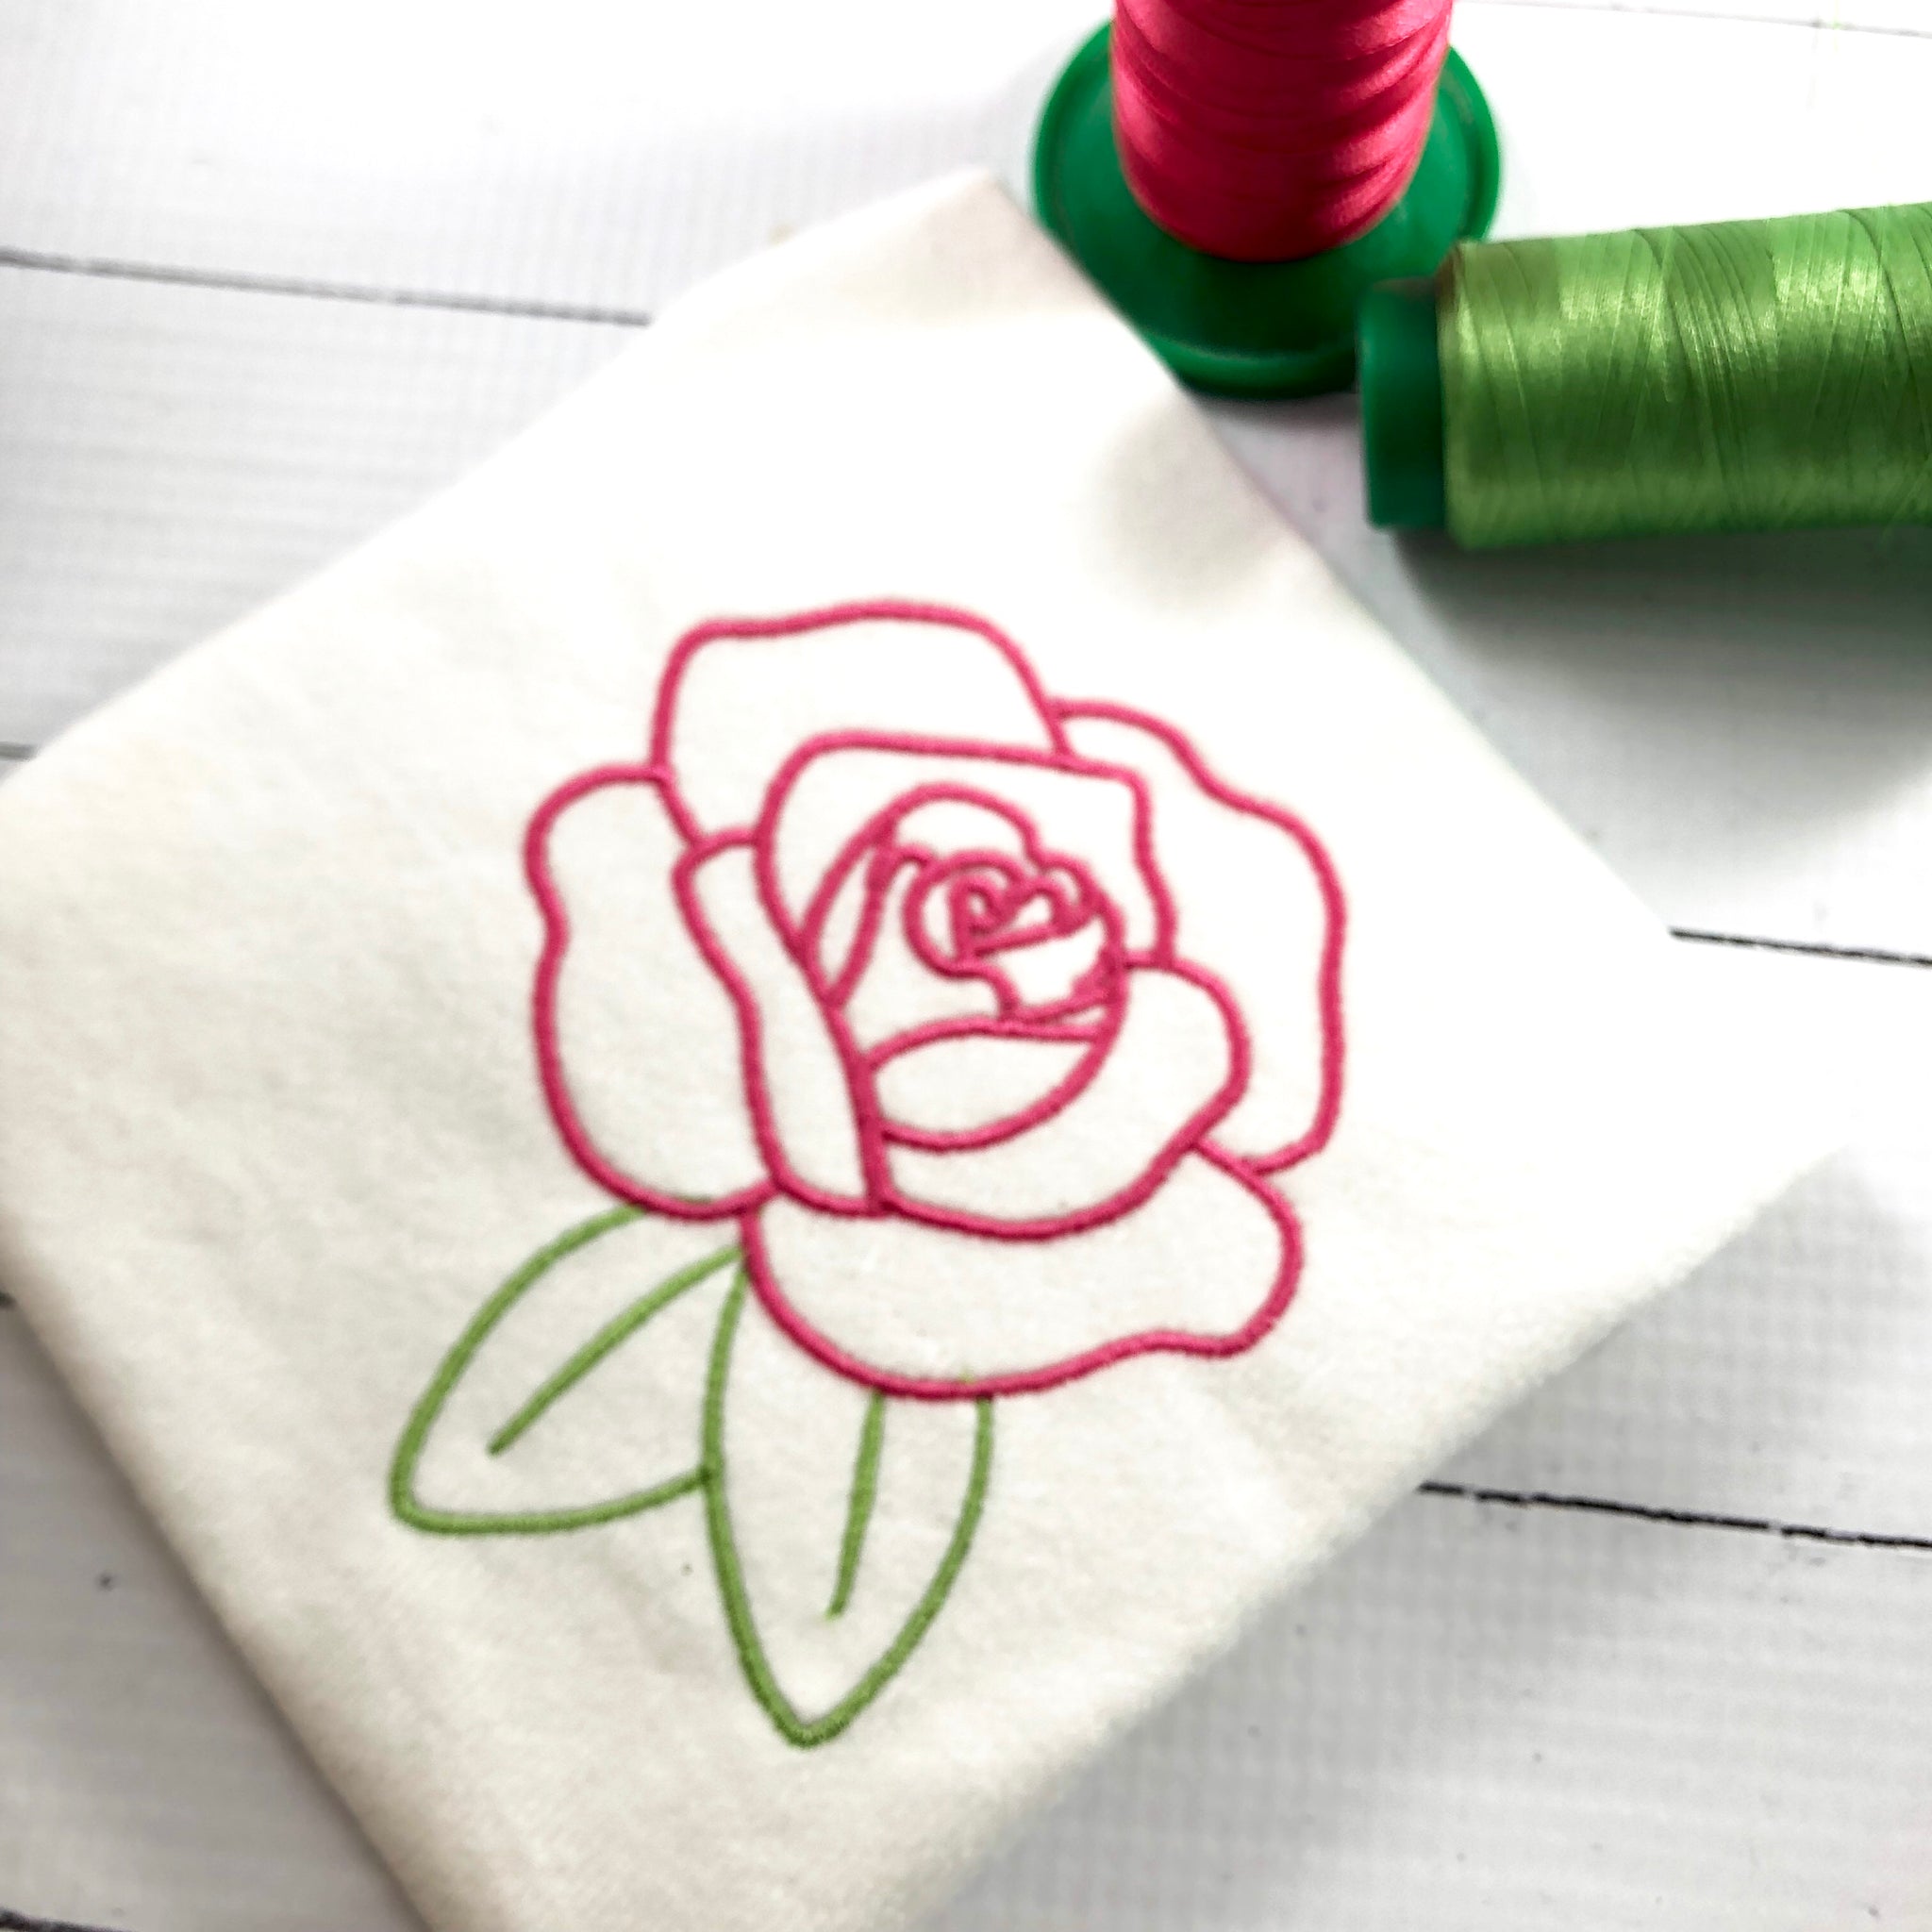 rose pes embroidery design